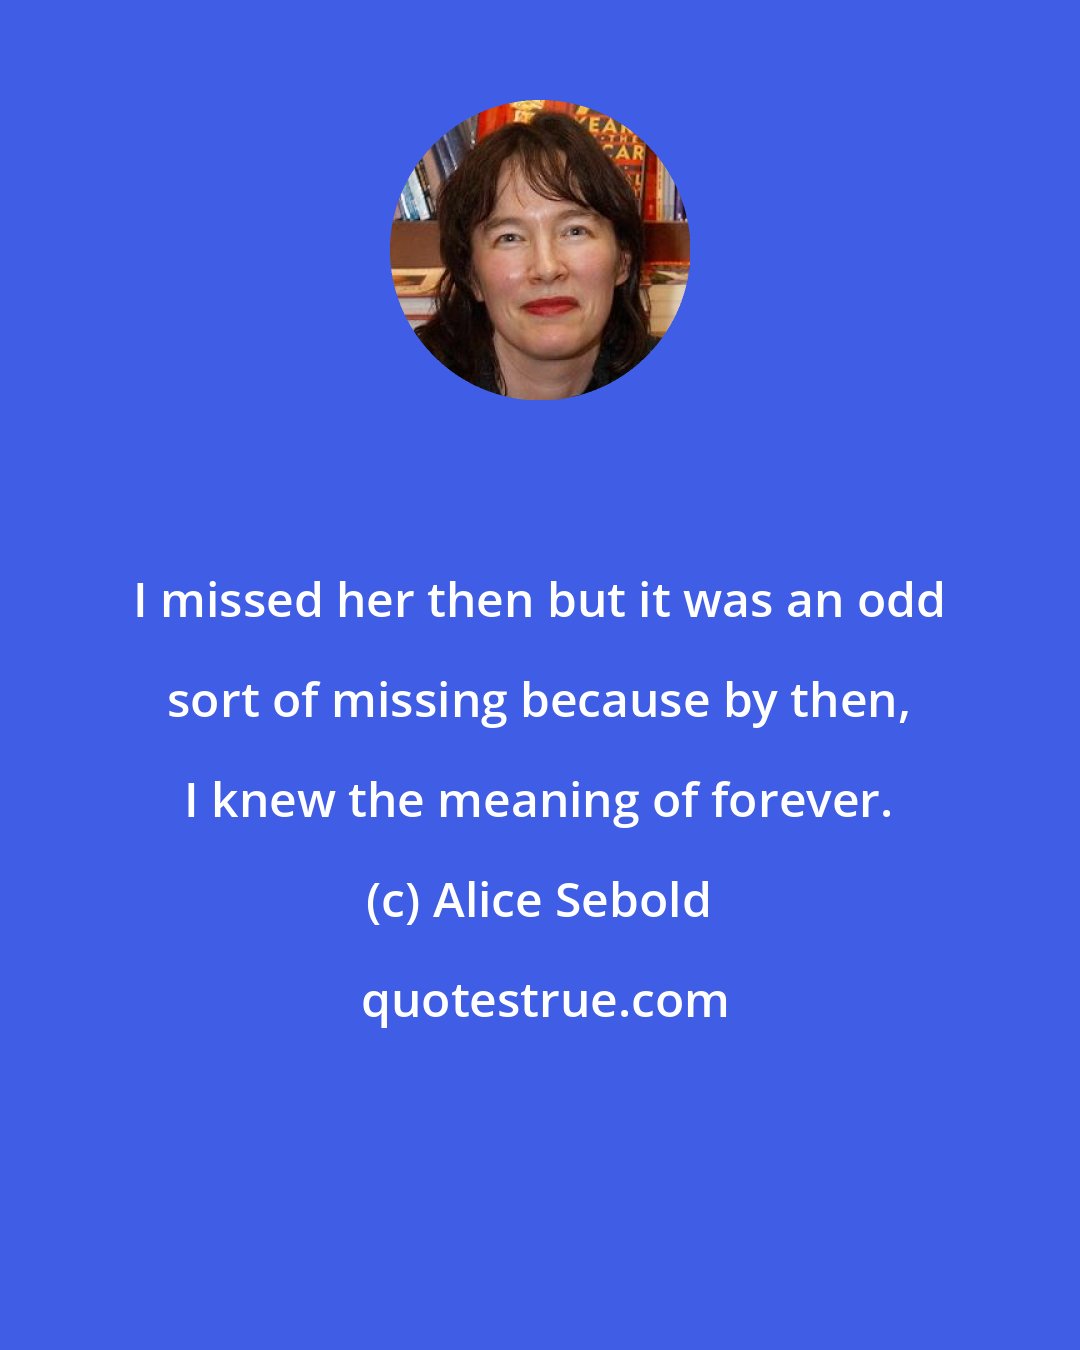 Alice Sebold: I missed her then but it was an odd sort of missing because by then, I knew the meaning of forever.